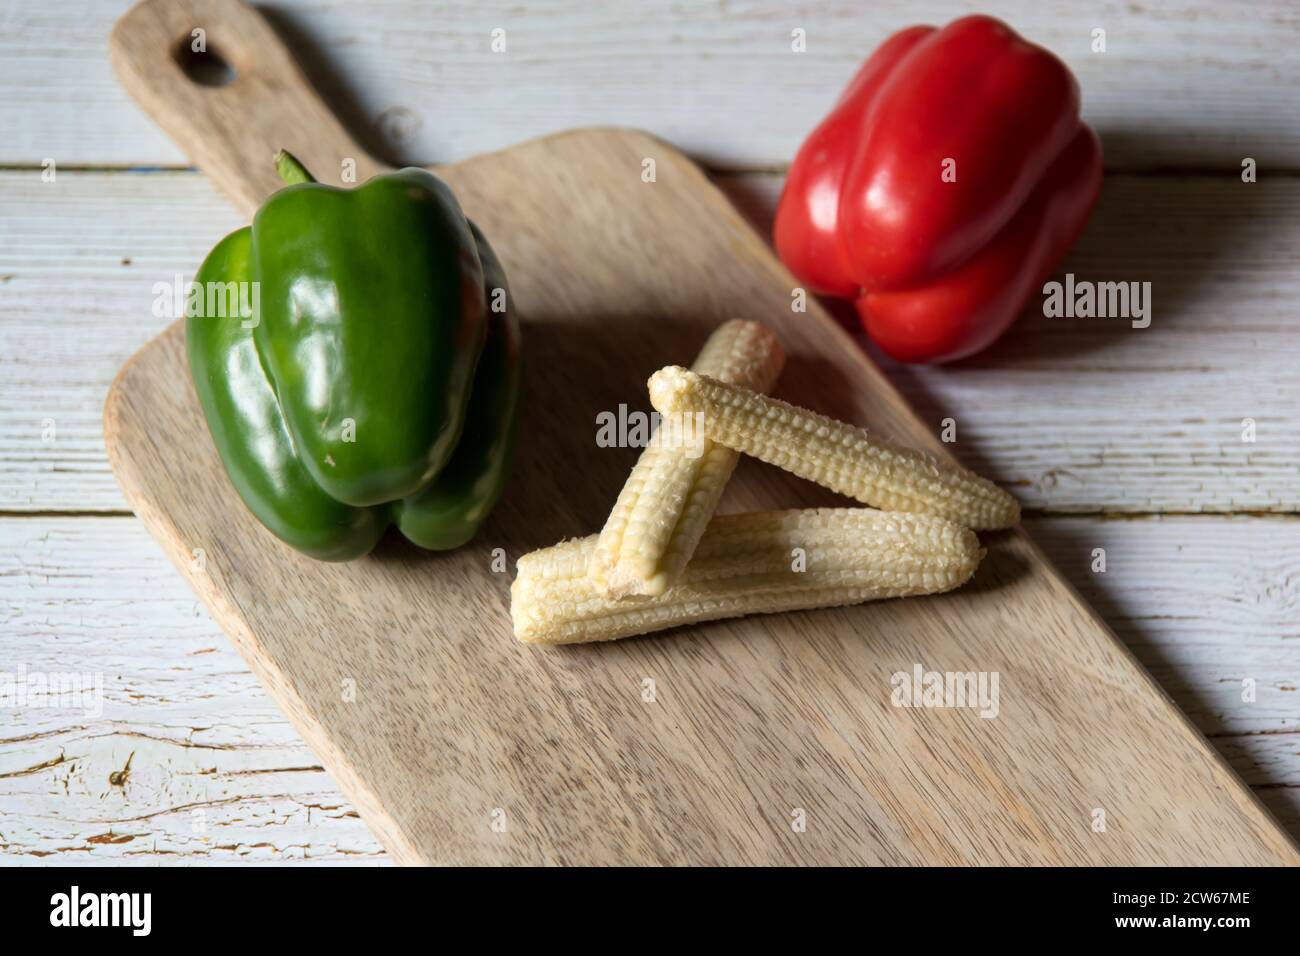 Baby corns and bell peppers Stock Photo